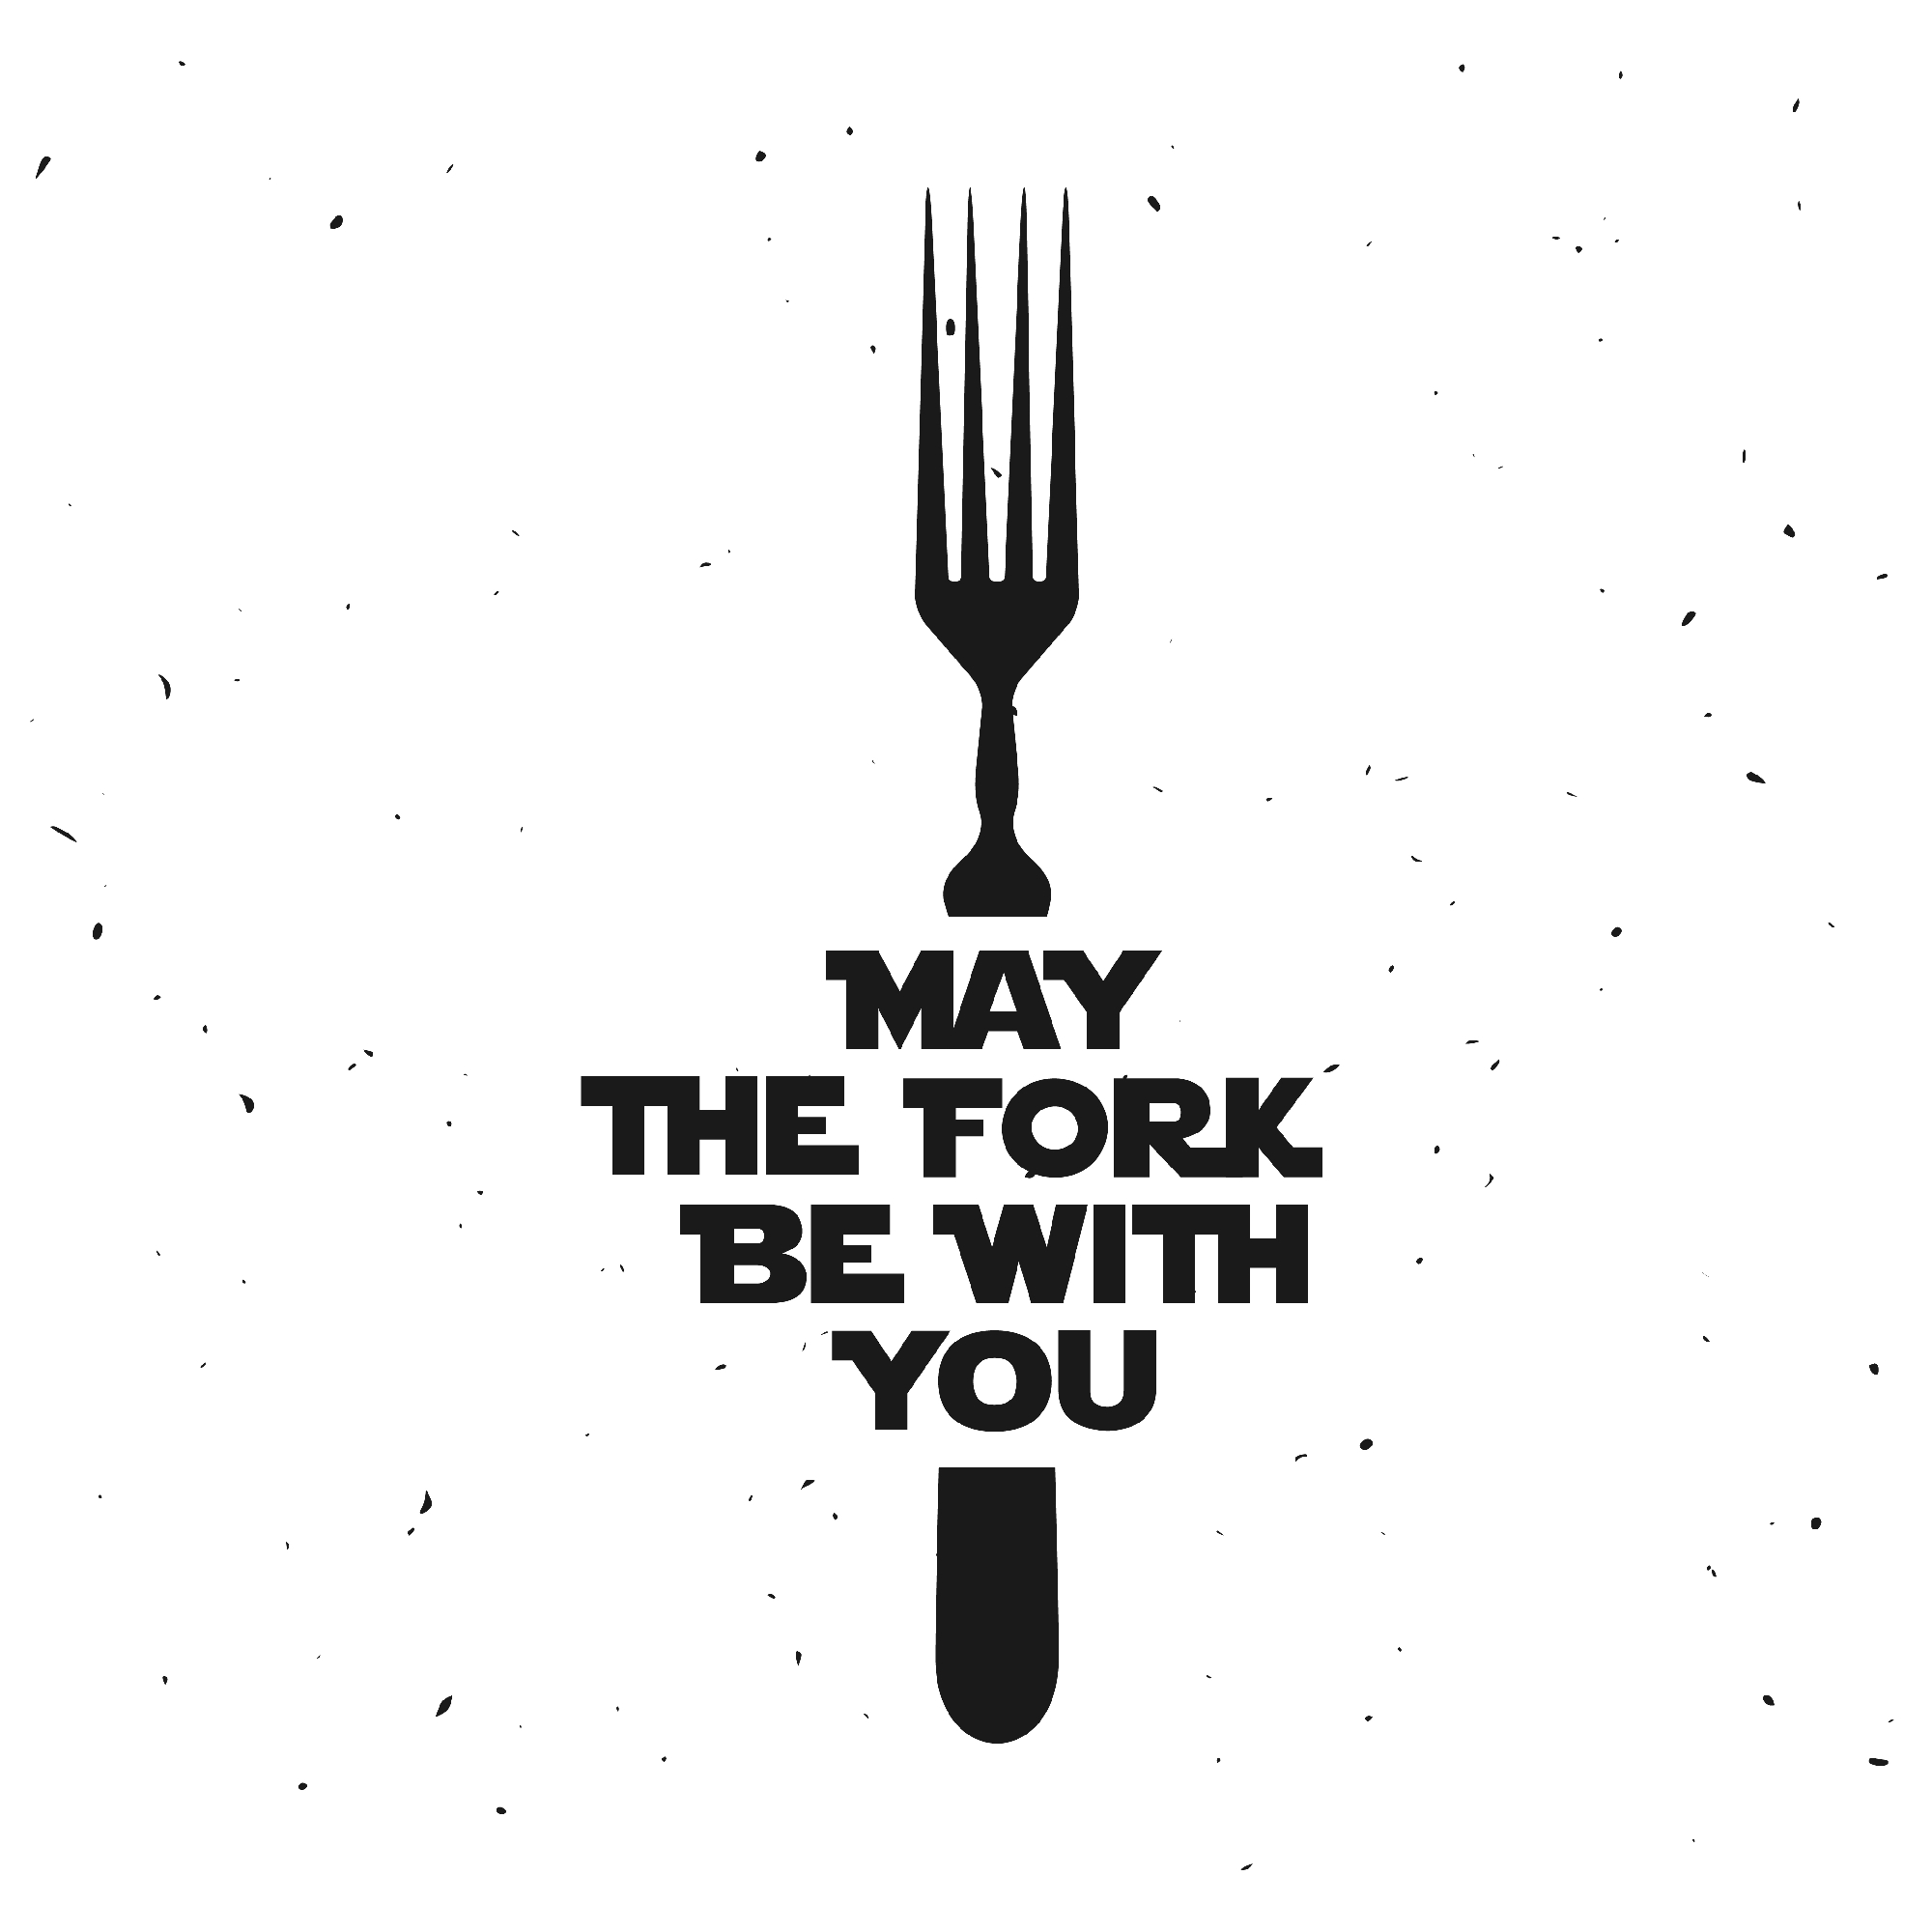 Tranh canvas hiện đại May the fork be with you